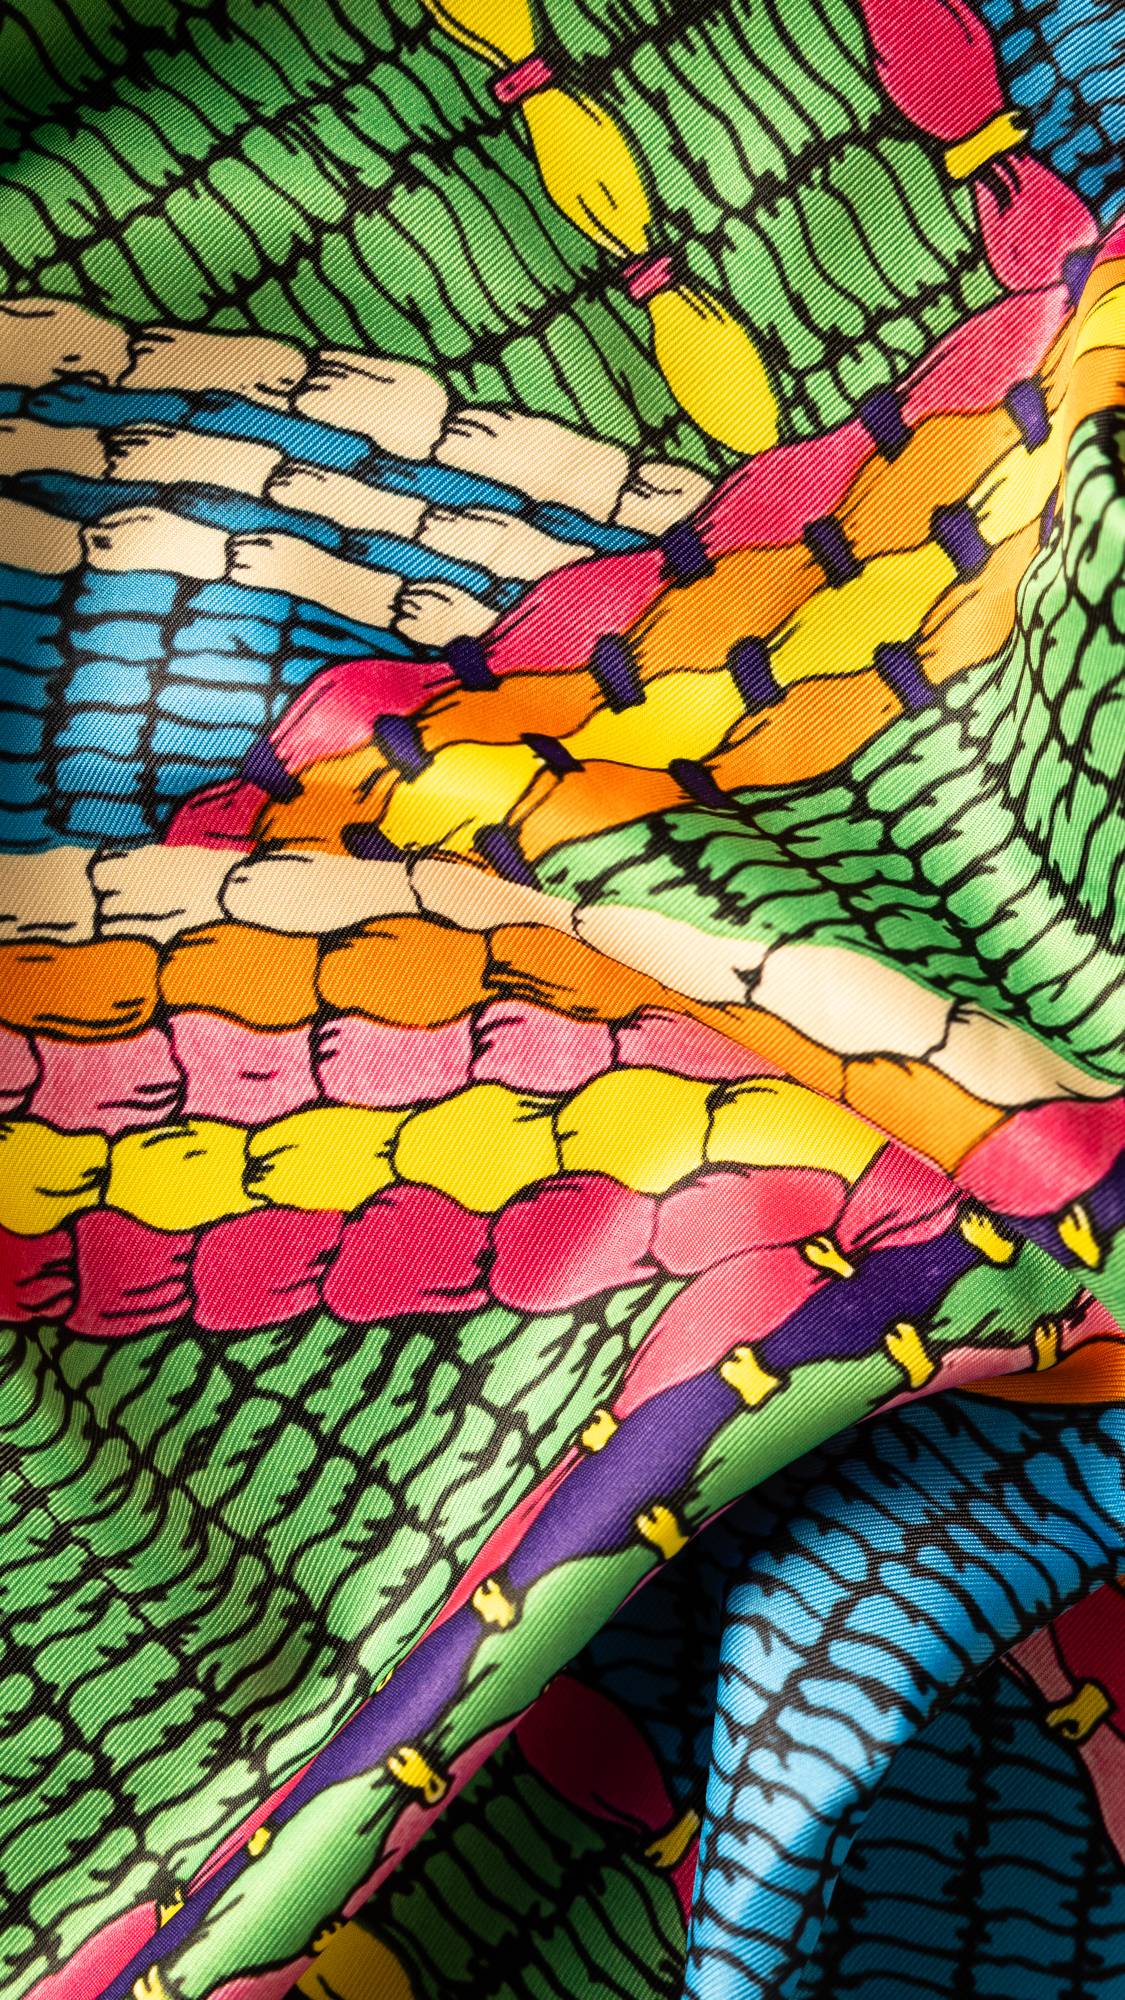 Image shows a super close-up of the Neon Weave knot wrap focusing on the intricate details in the weave style illustration.